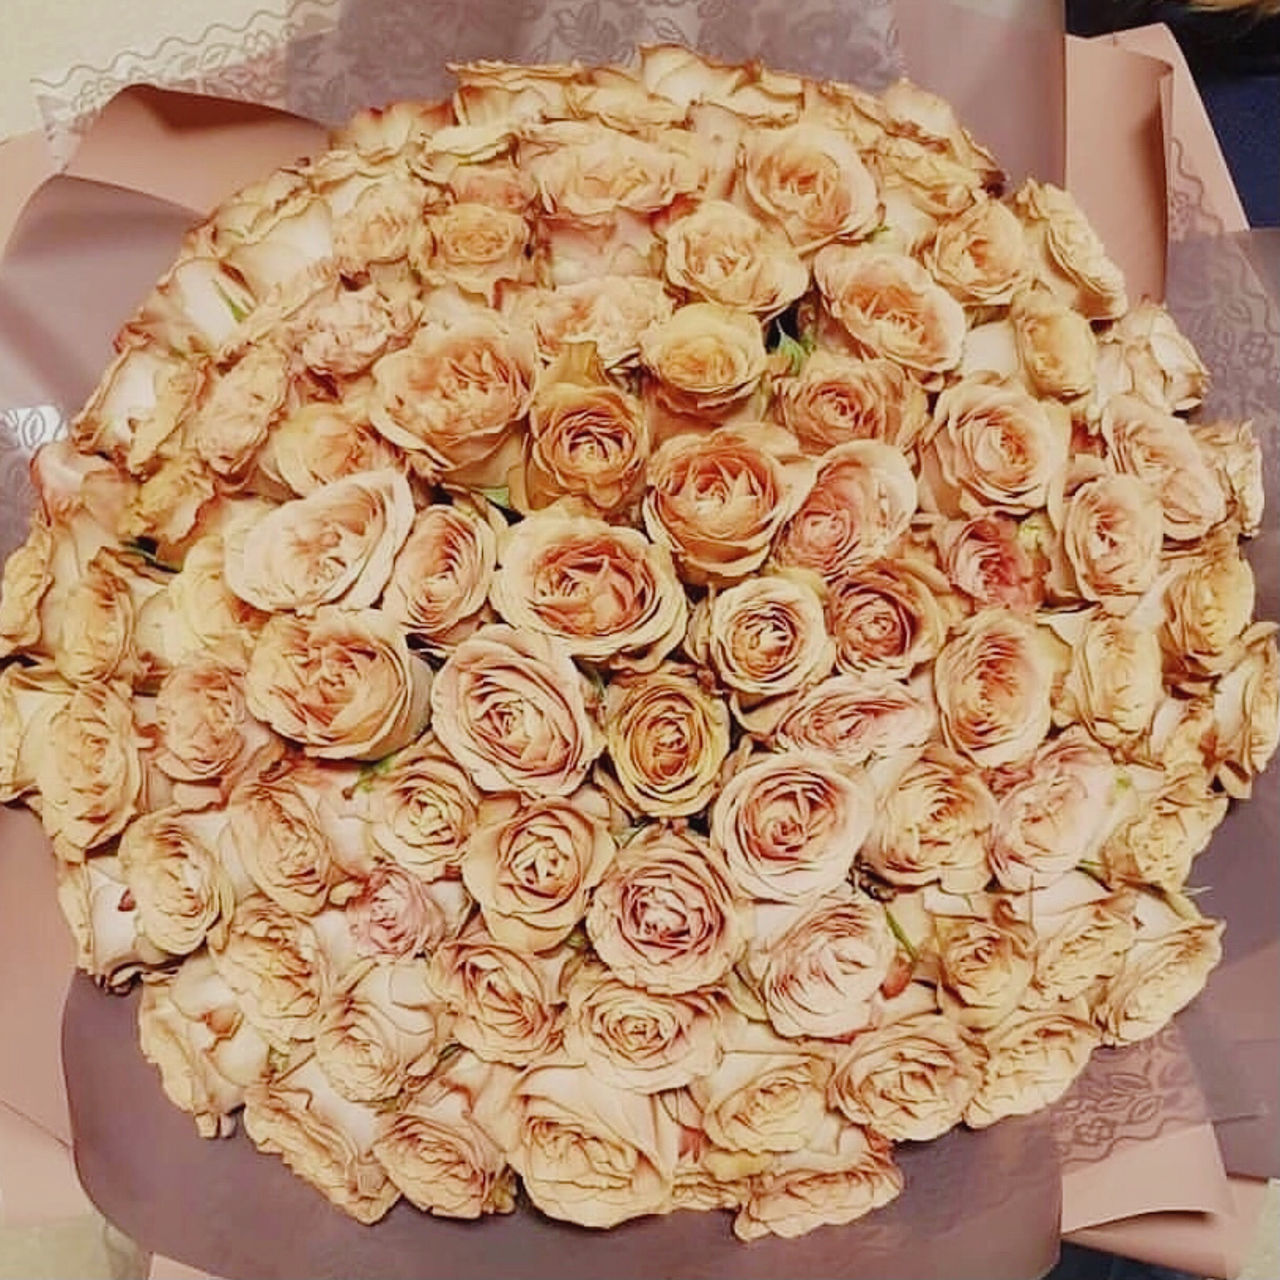 CLOSE-UP OF ROSE BOUQUET ON FLOOR